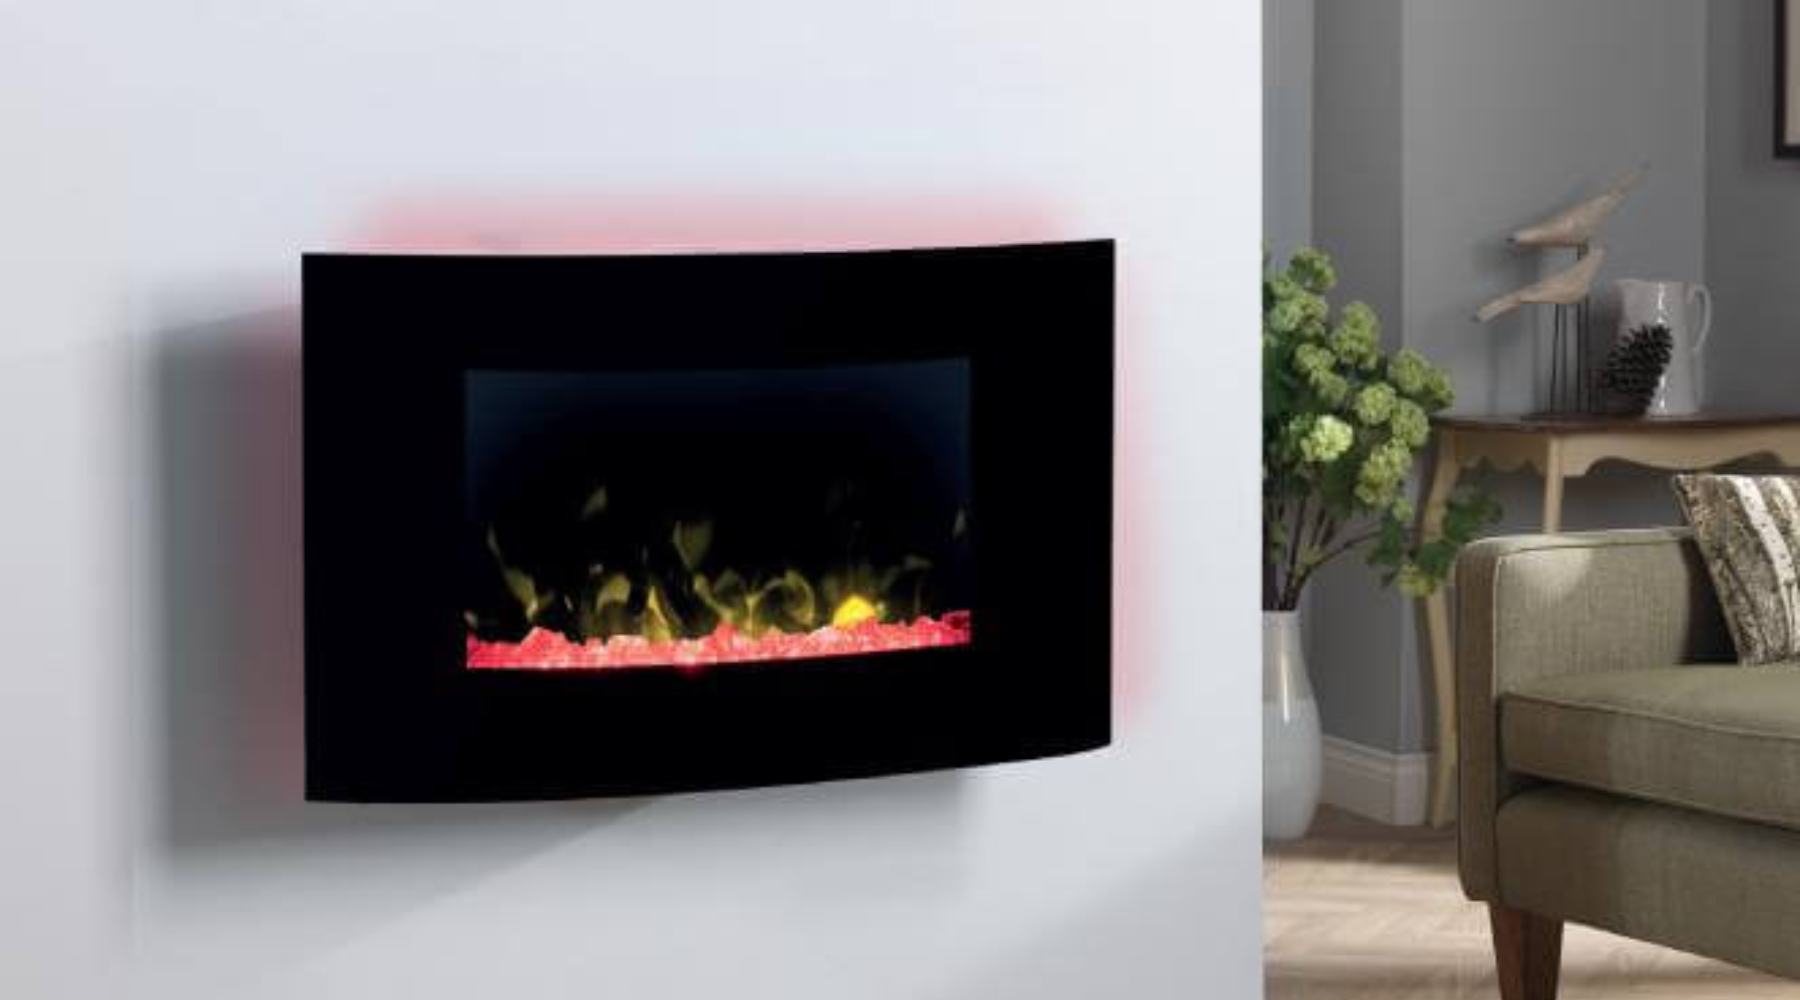 Buying a Dimplex Electric Fire in Ireland in 2023